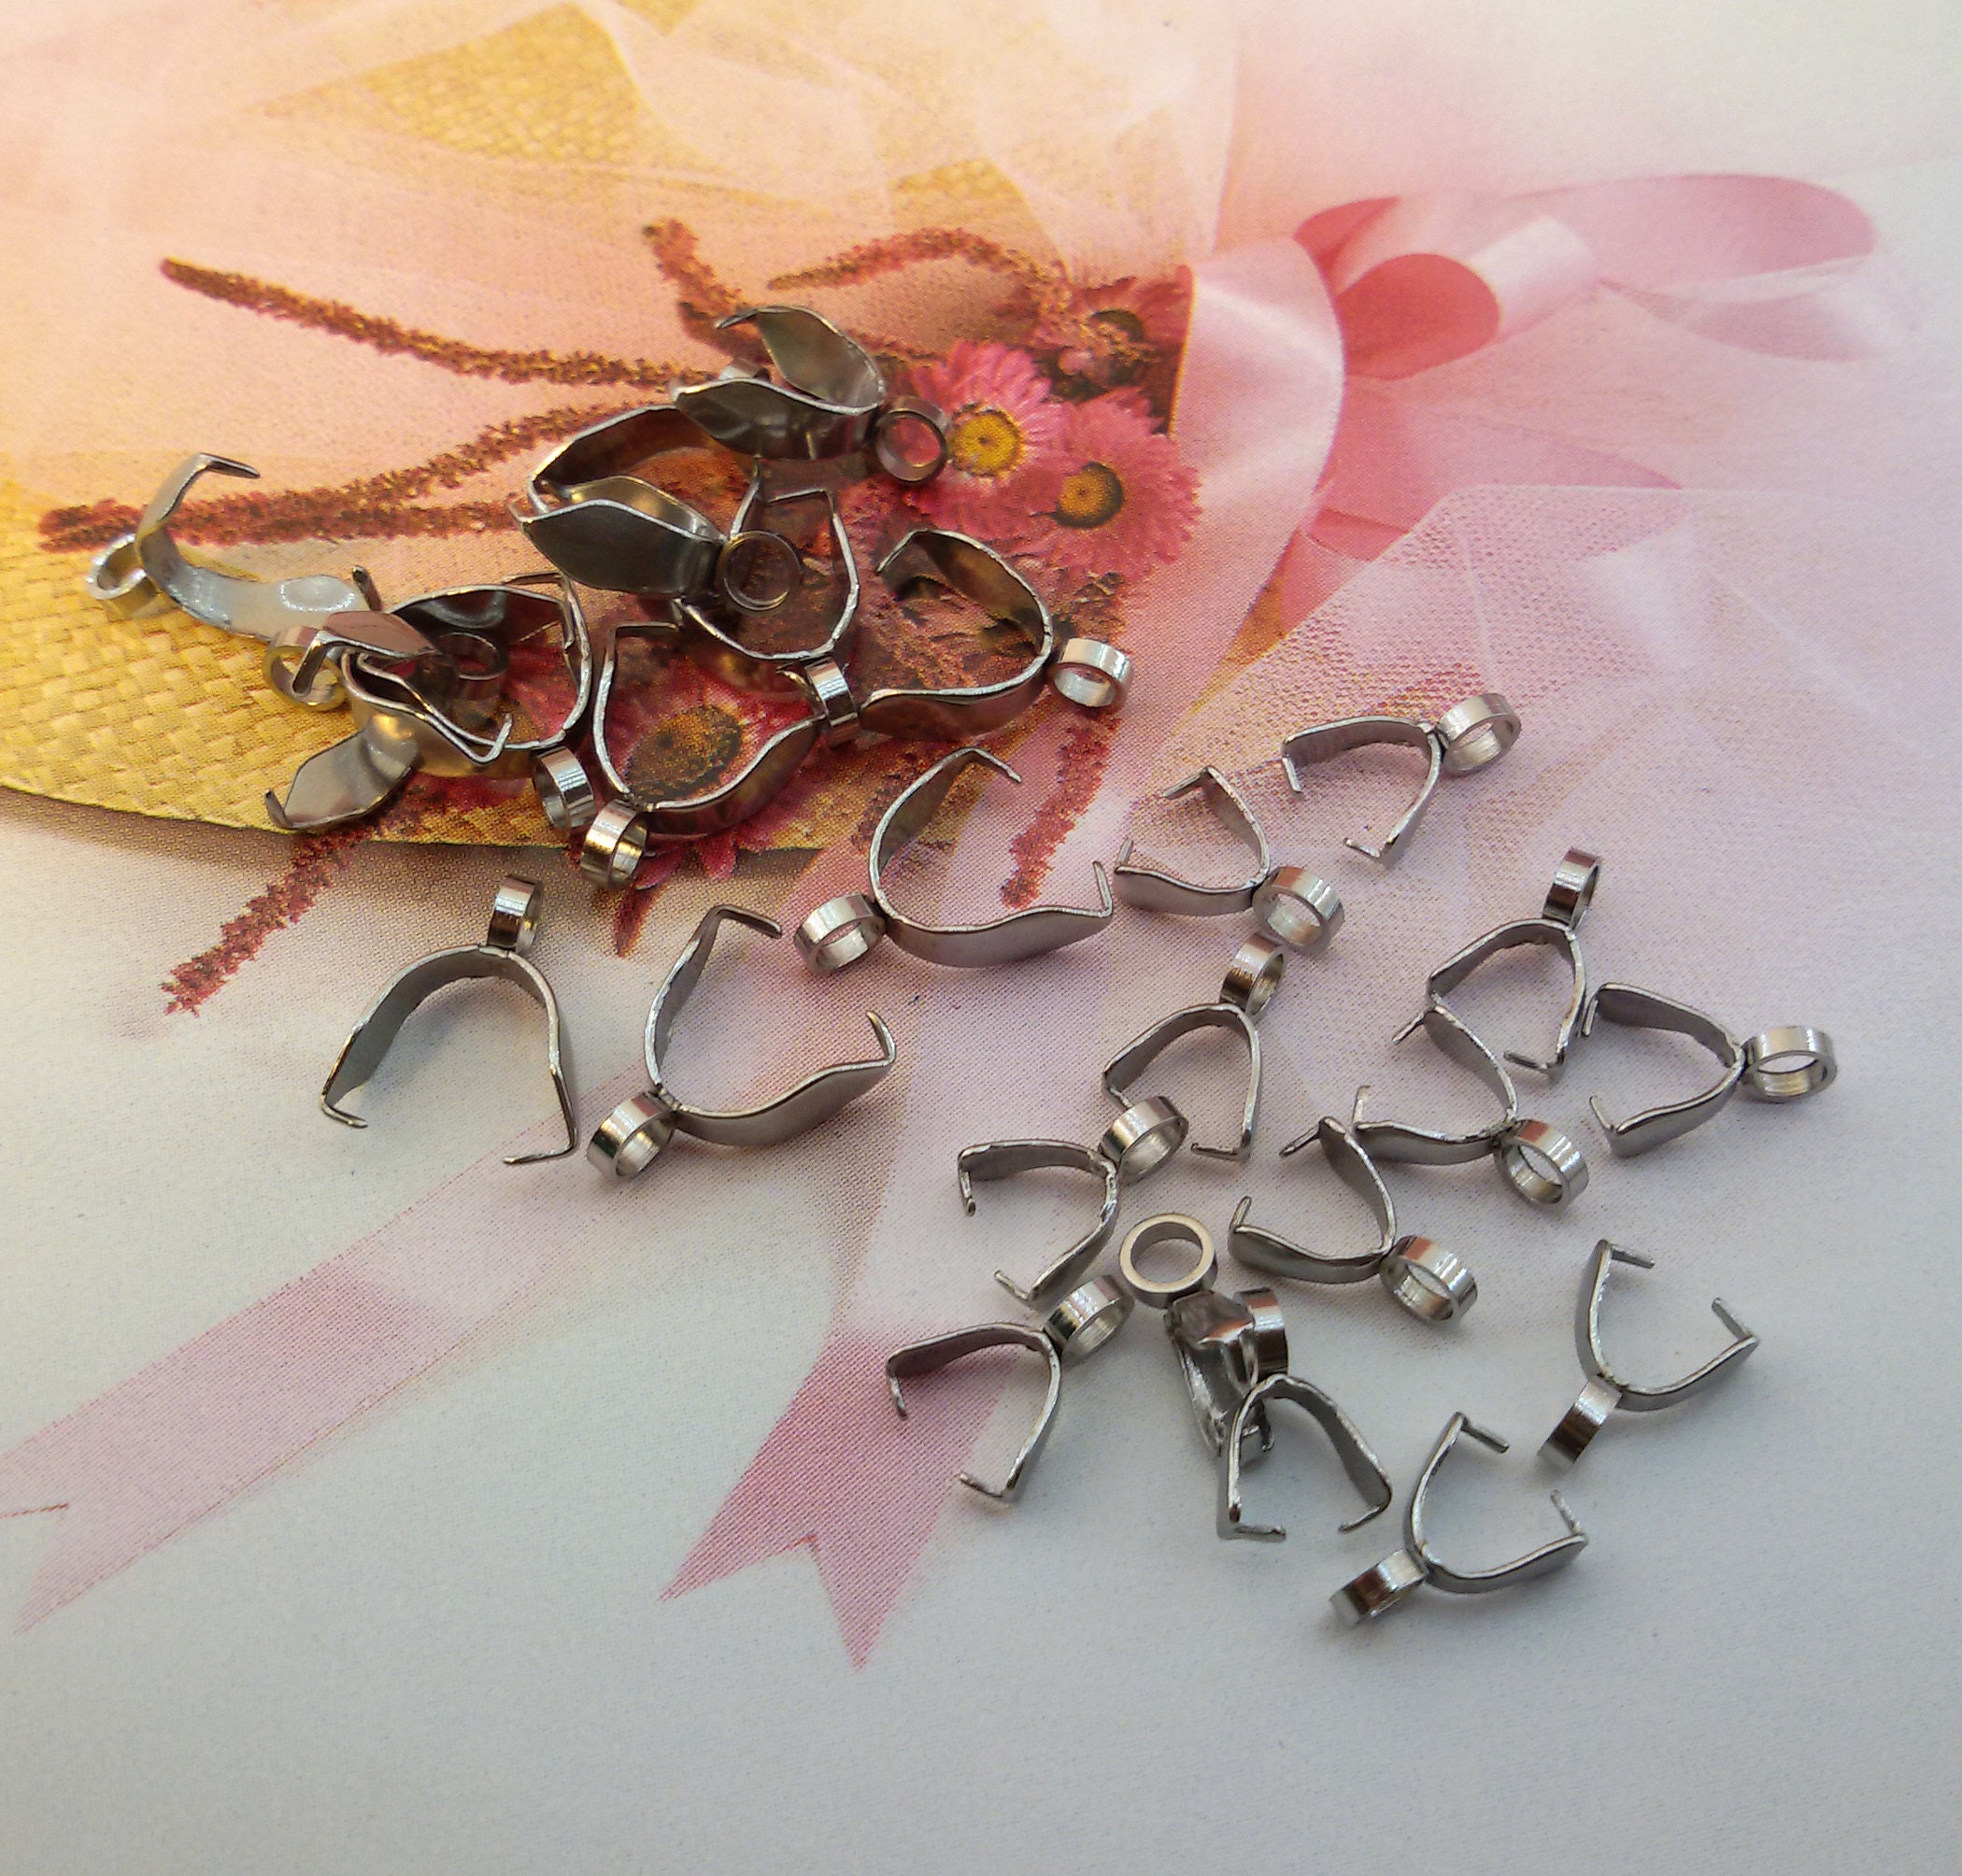 30PCS Pendant Pinch Bail Clasps Necklace Hooks Clips Charm Pinch Bails  Connector Accessories for DIY Bracelets Earrings Jewelry Making 